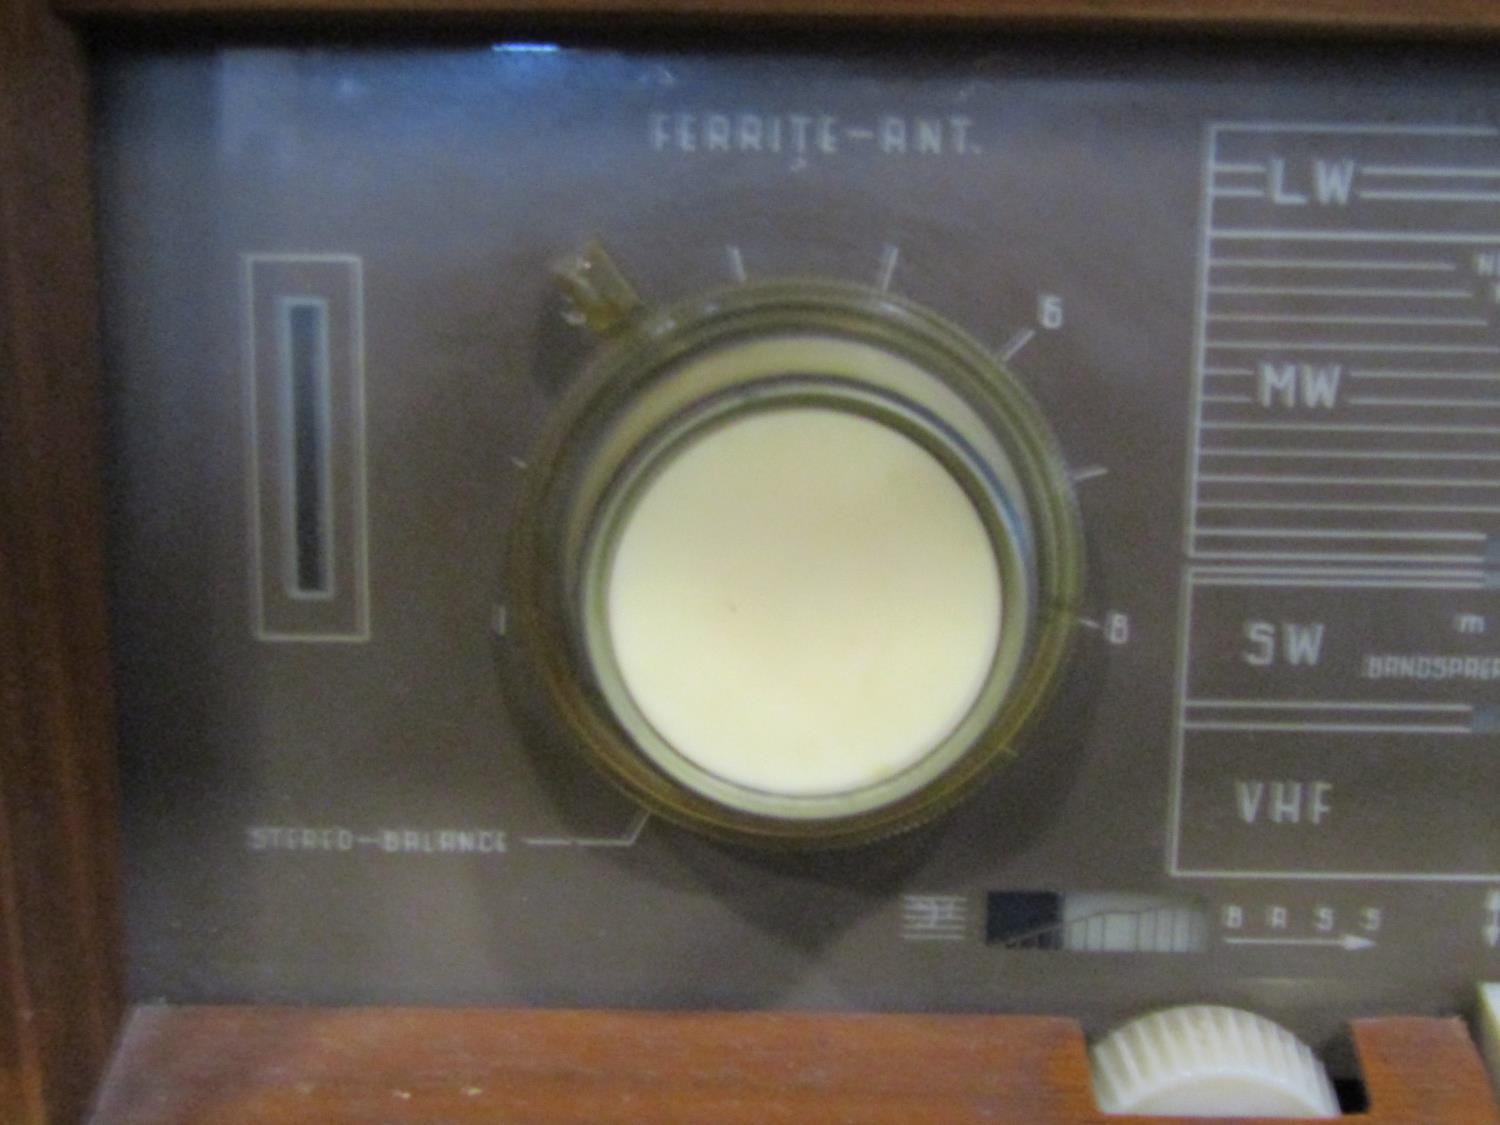 A mid-20th century floorstanding radiogram, Arkansas Deluxe with Garrard sliding turntable and - Image 4 of 8